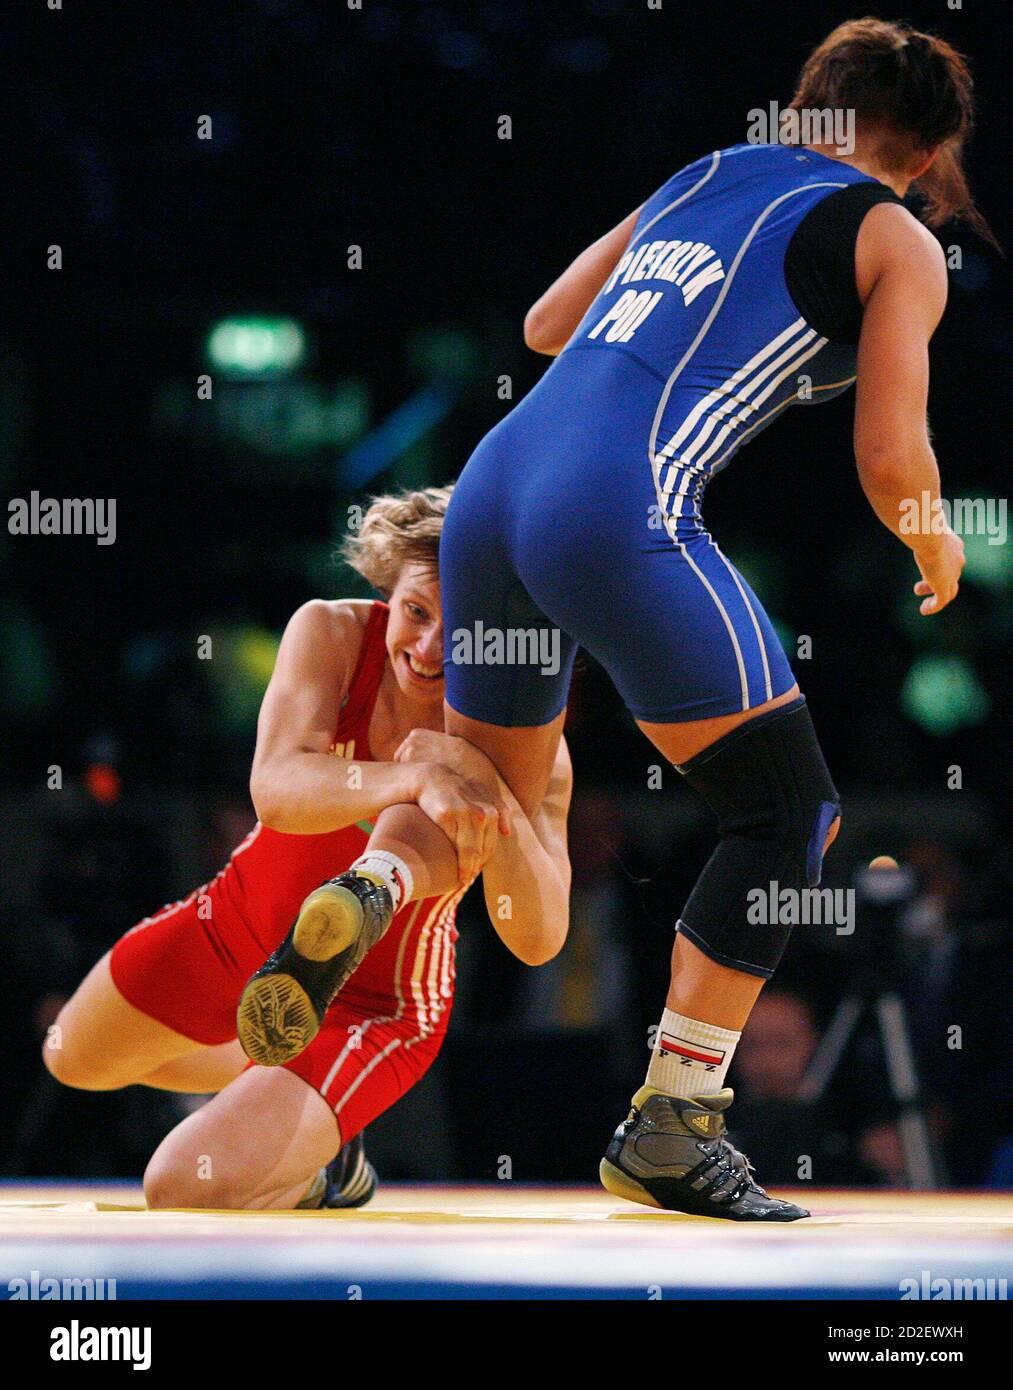 Optimal snesevis den første Azerbaijan's Yuliya Atkevich (red) grabs the leg of Poland's Agata Pietrzyk  during their women's 59 kg free style gold medal match at the World  Wrestling Championships 2009 in Herning September 24, 2009.